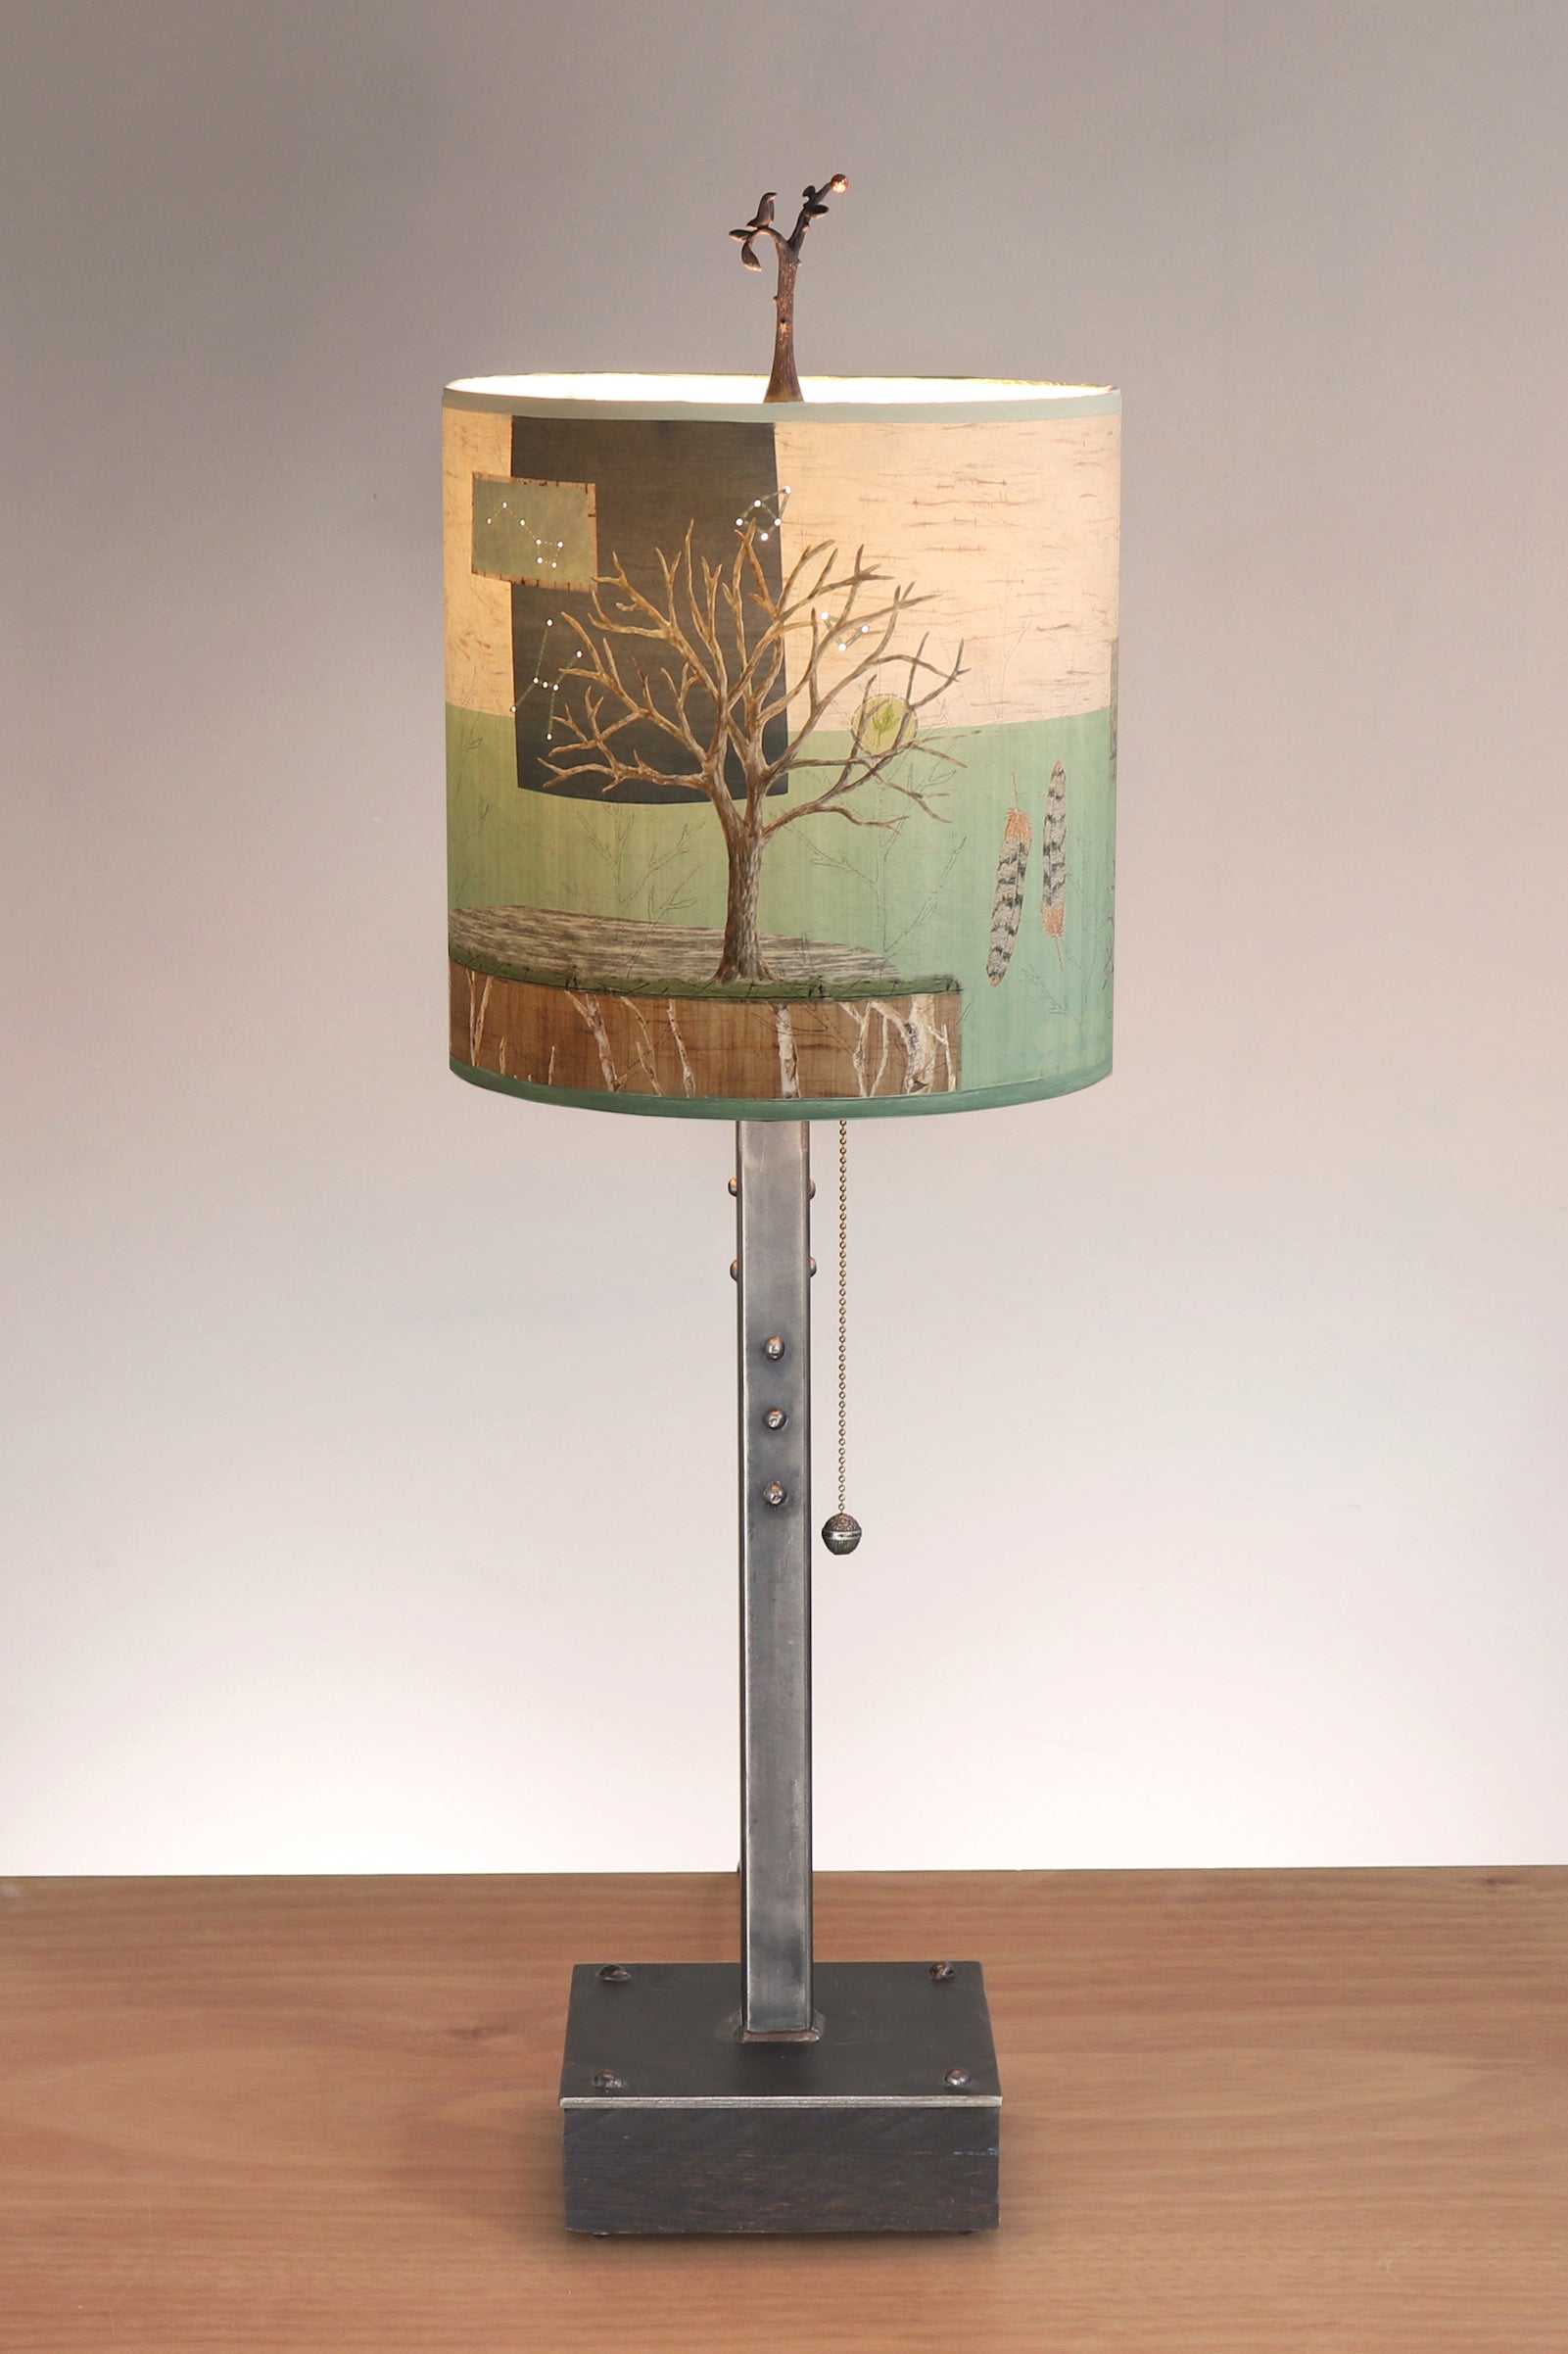 Janna Ugone & Co Table Lamps Steel Table Lamp on Wood with Medium Drum Shade in Wander in Field